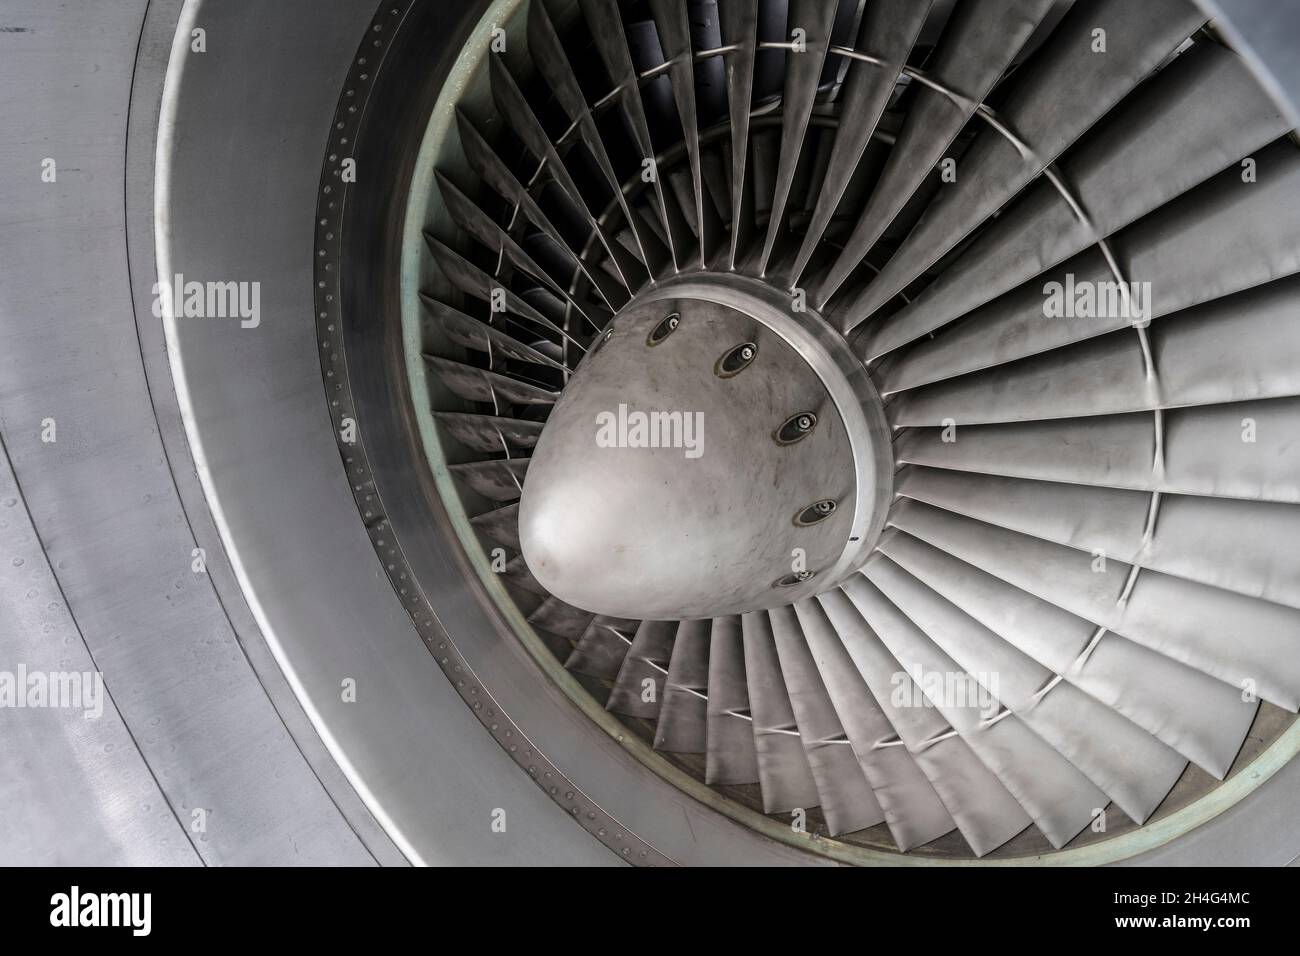 air intake fan of a jet engine Stock Photo